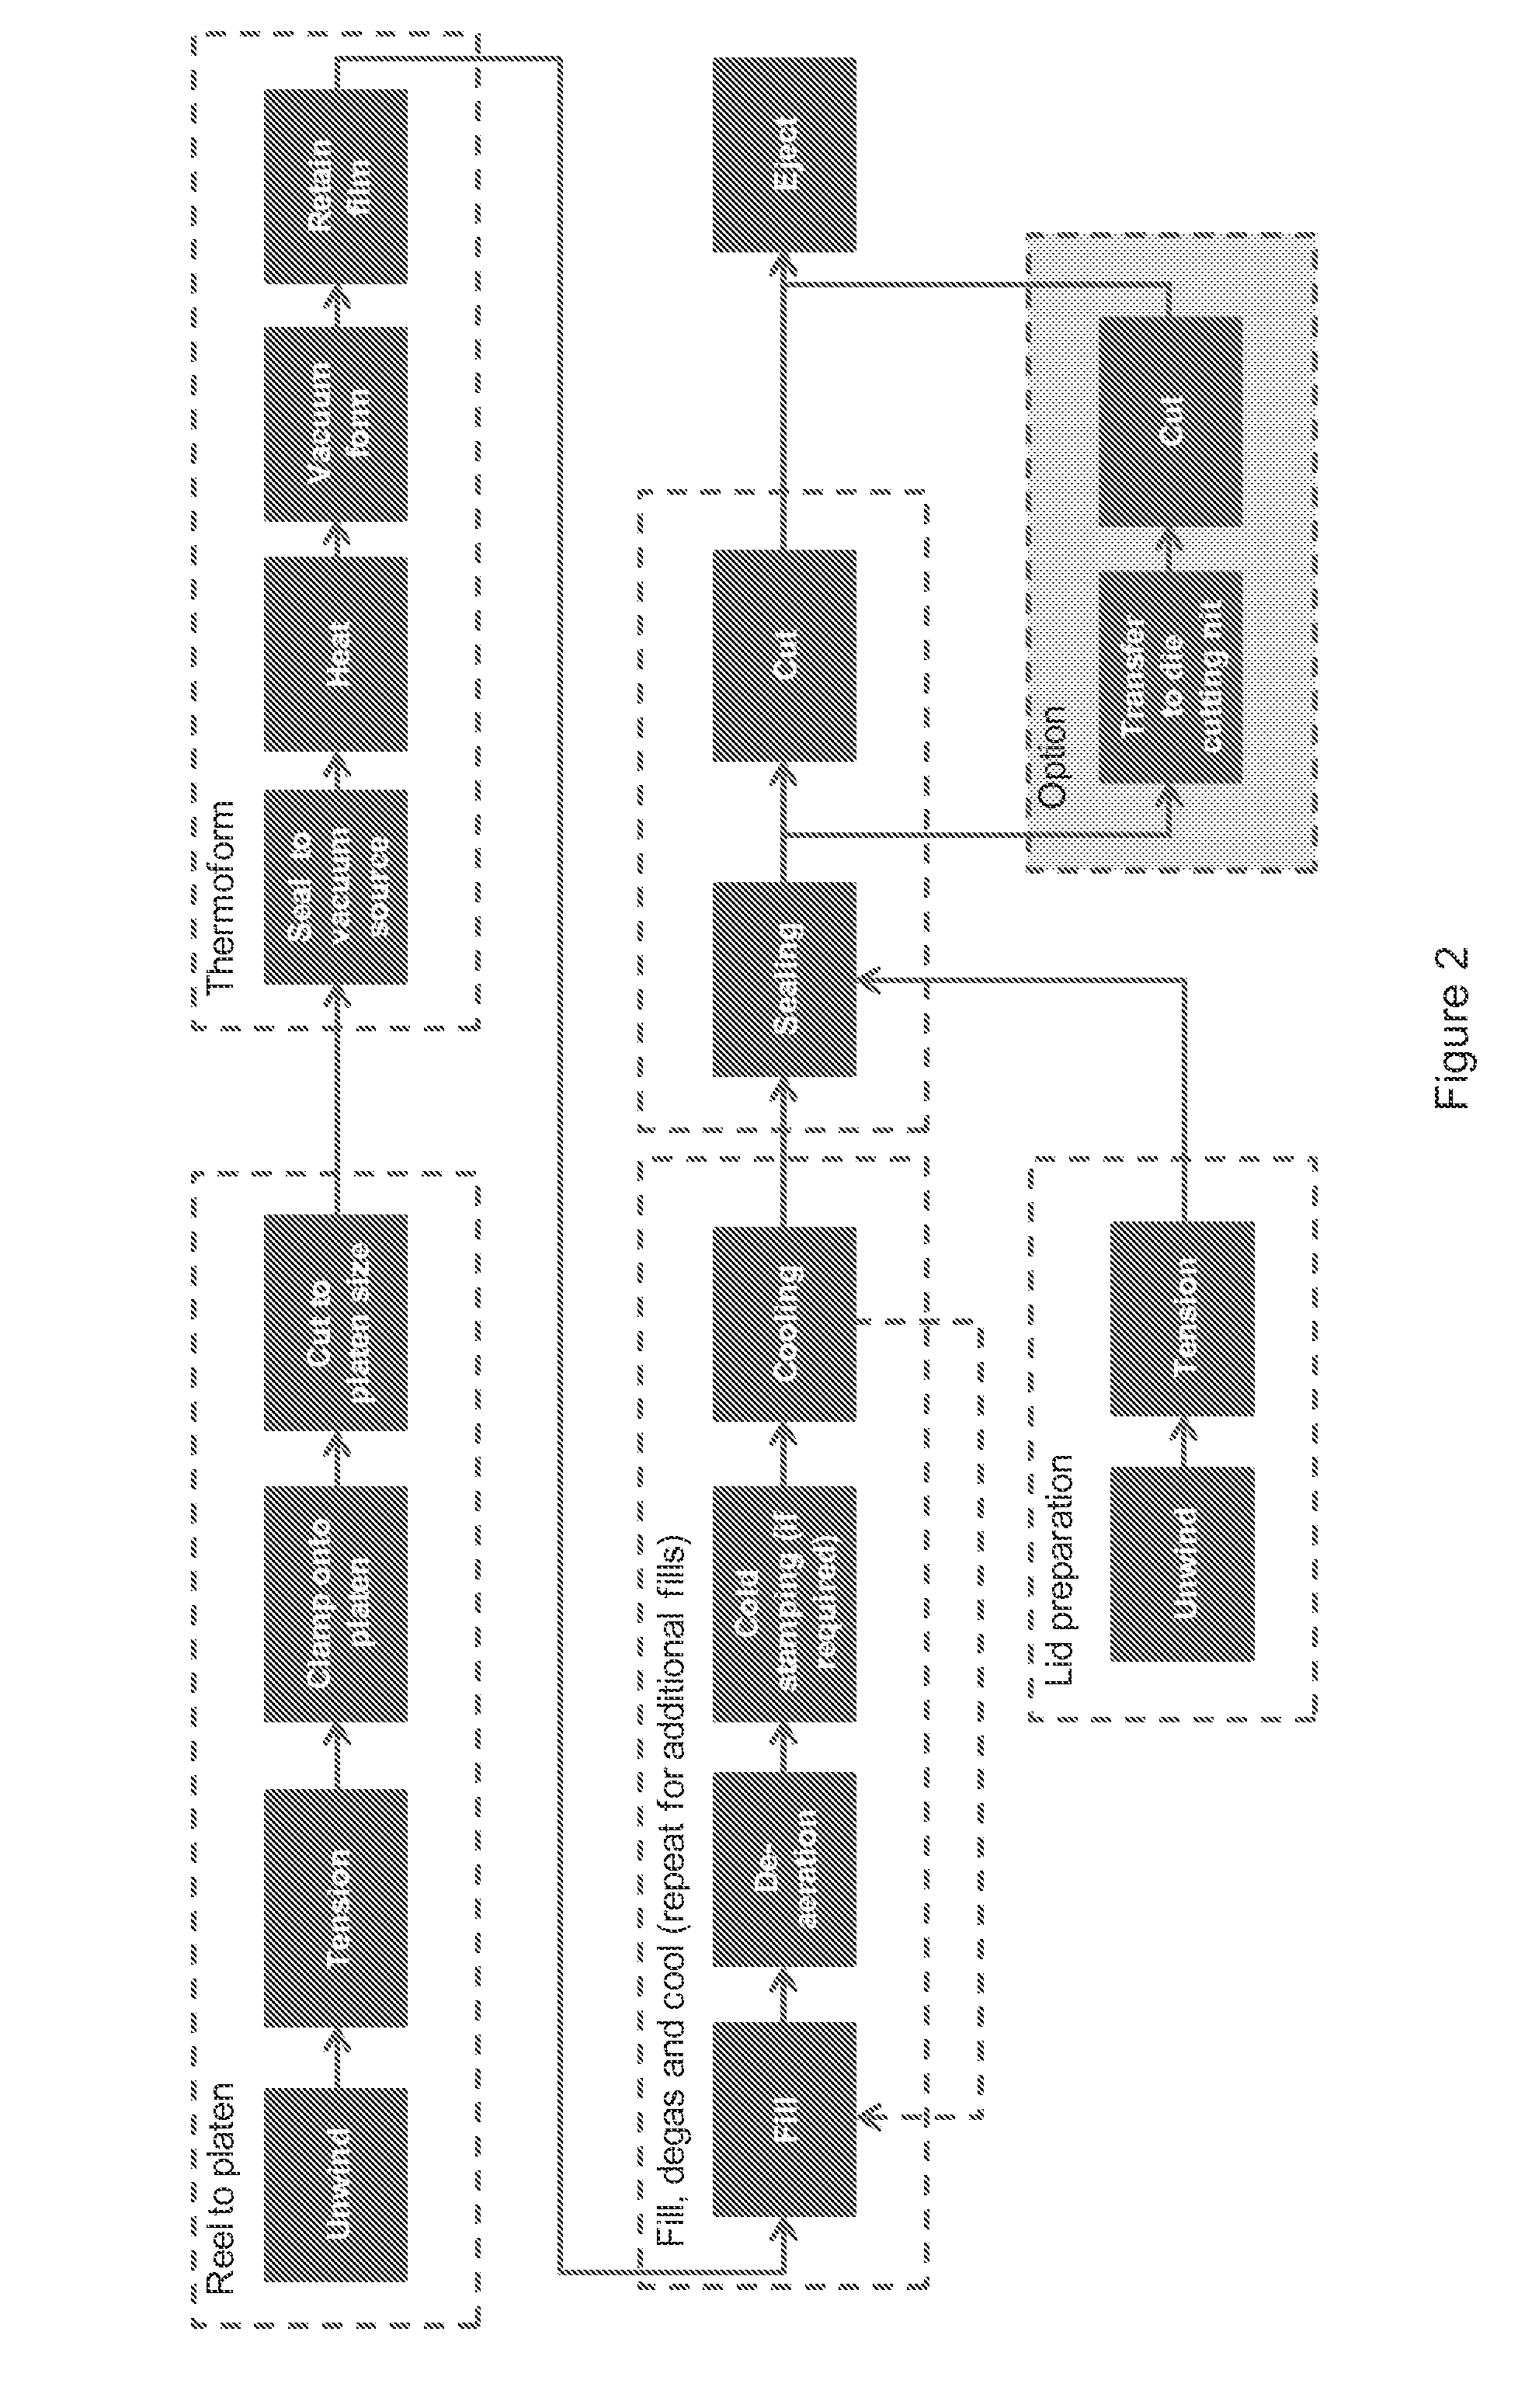 Mold in place system and method of making confectionery products